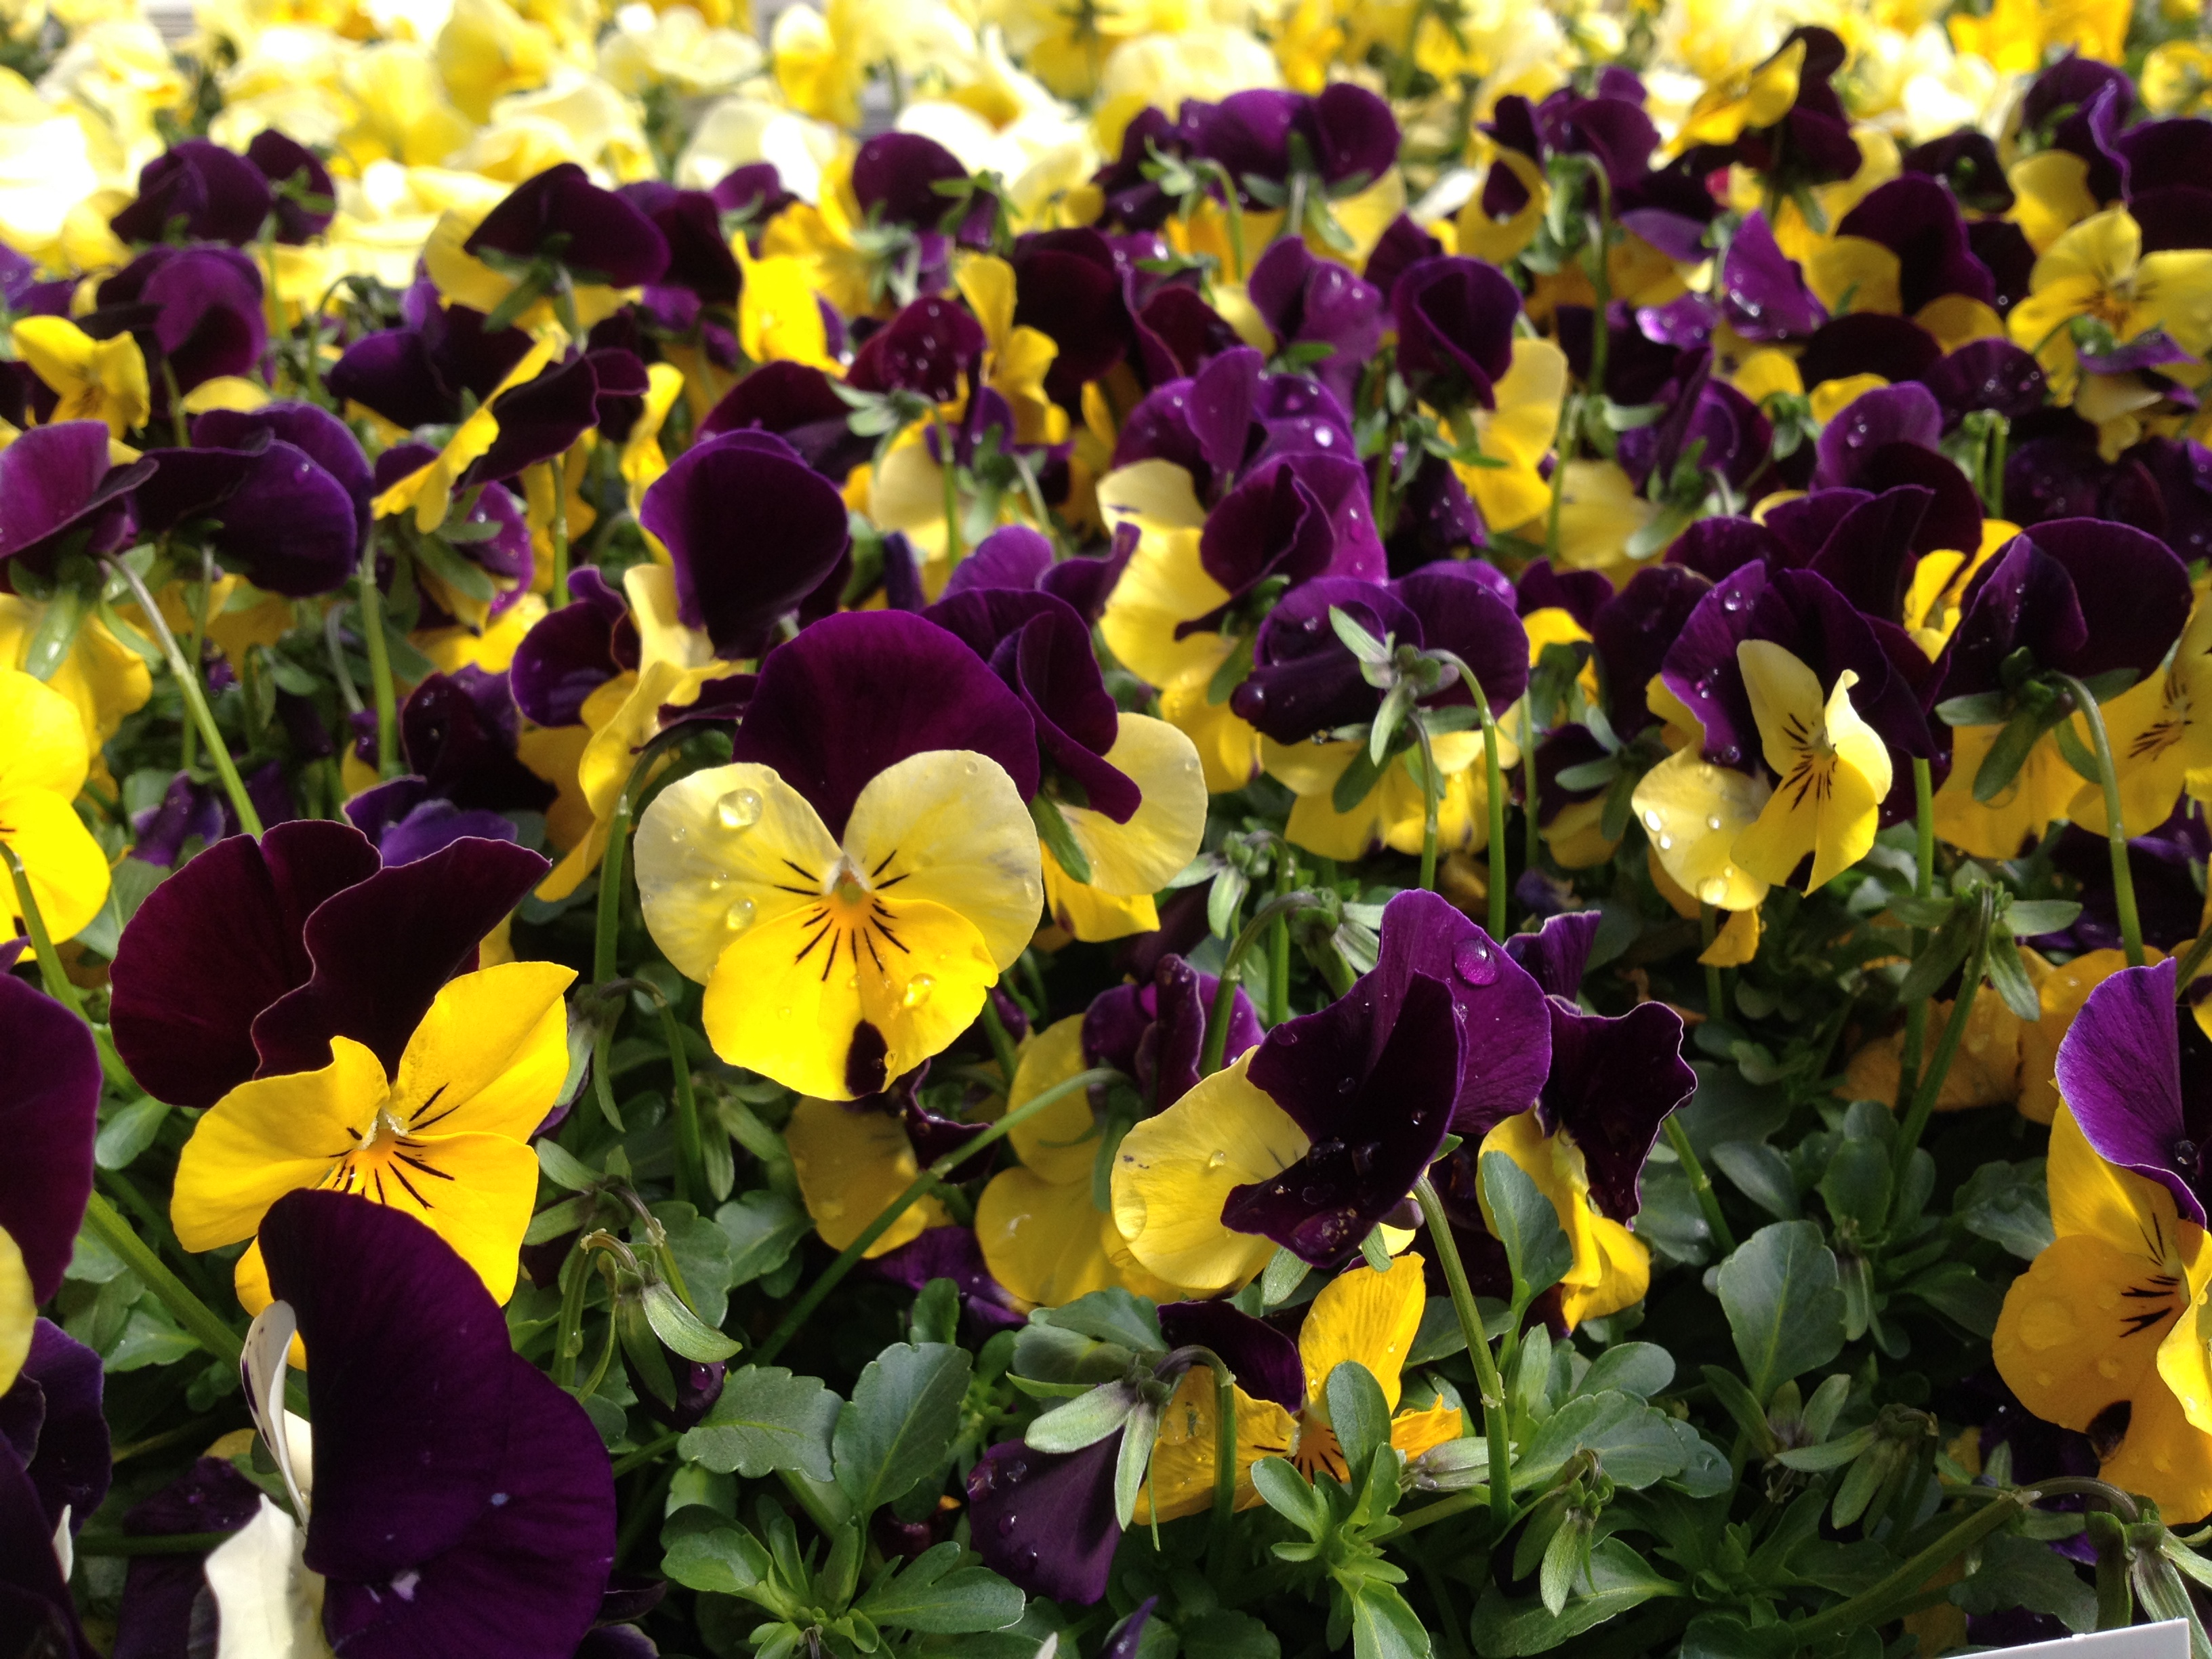 PANSIES ARE HERE!